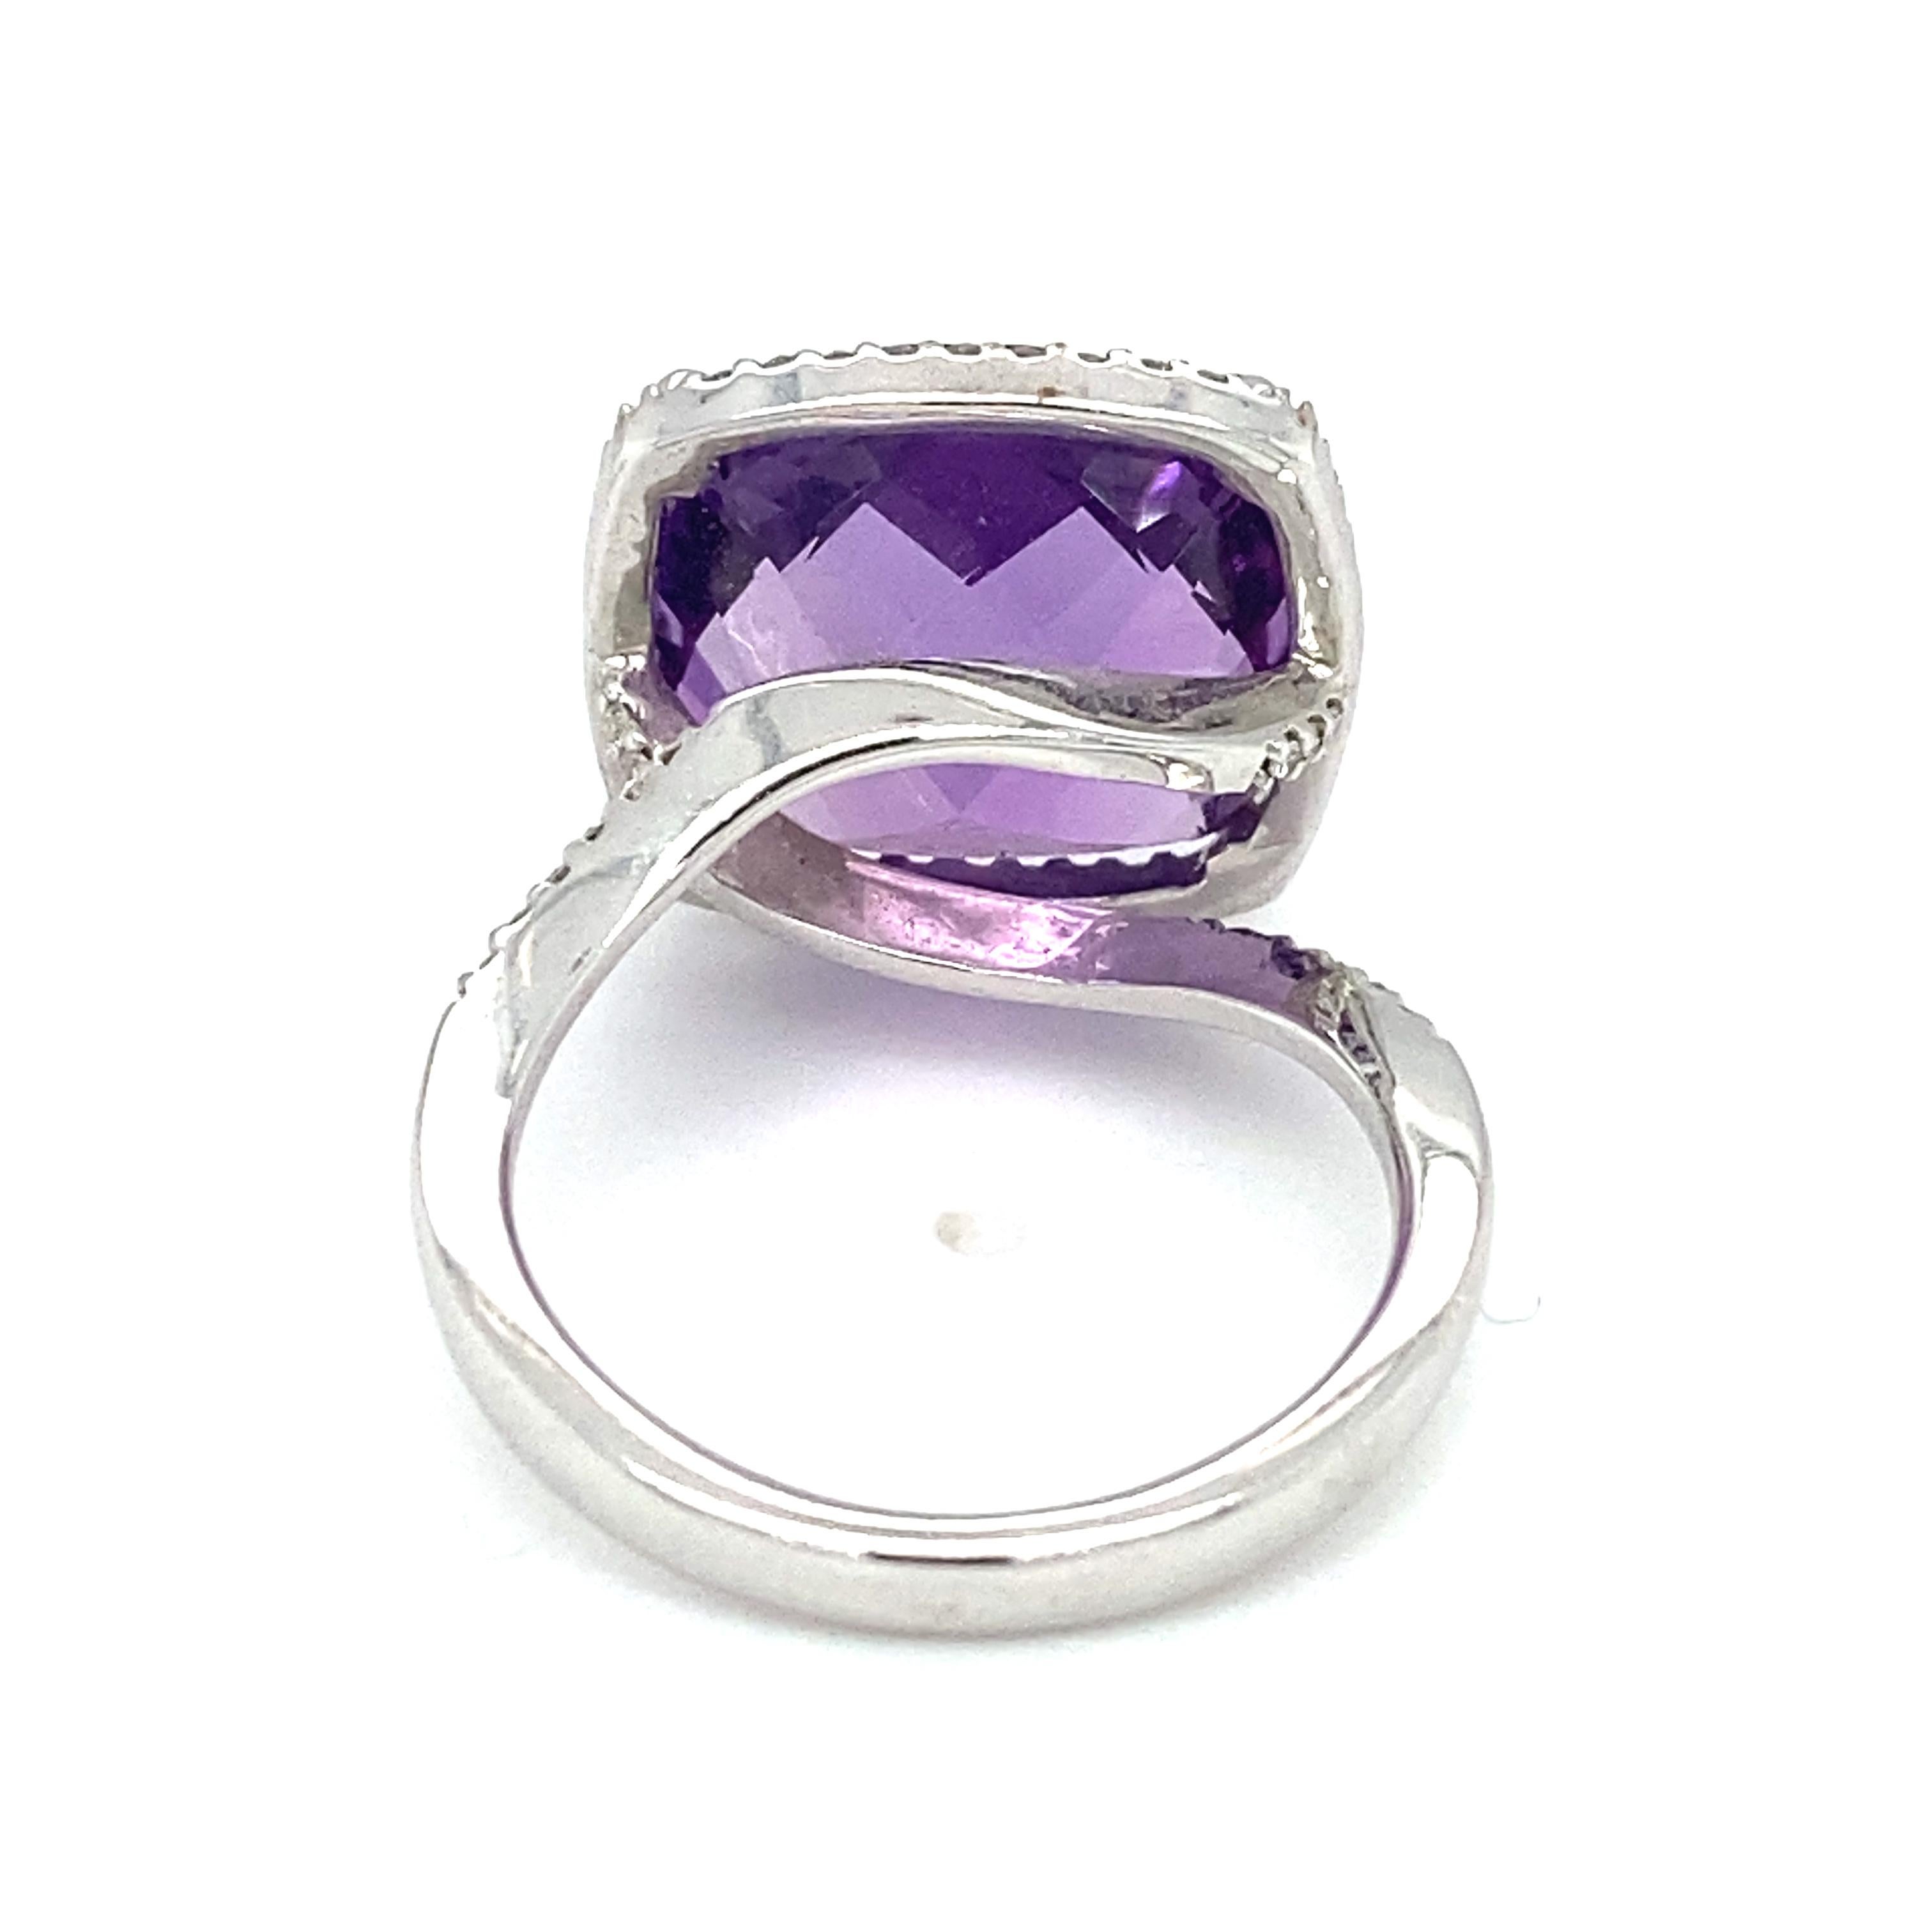 2000s 8 Carat Amethyst and Diamond Cocktail Ring in 14 Karat White Gold In Excellent Condition For Sale In Atlanta, GA